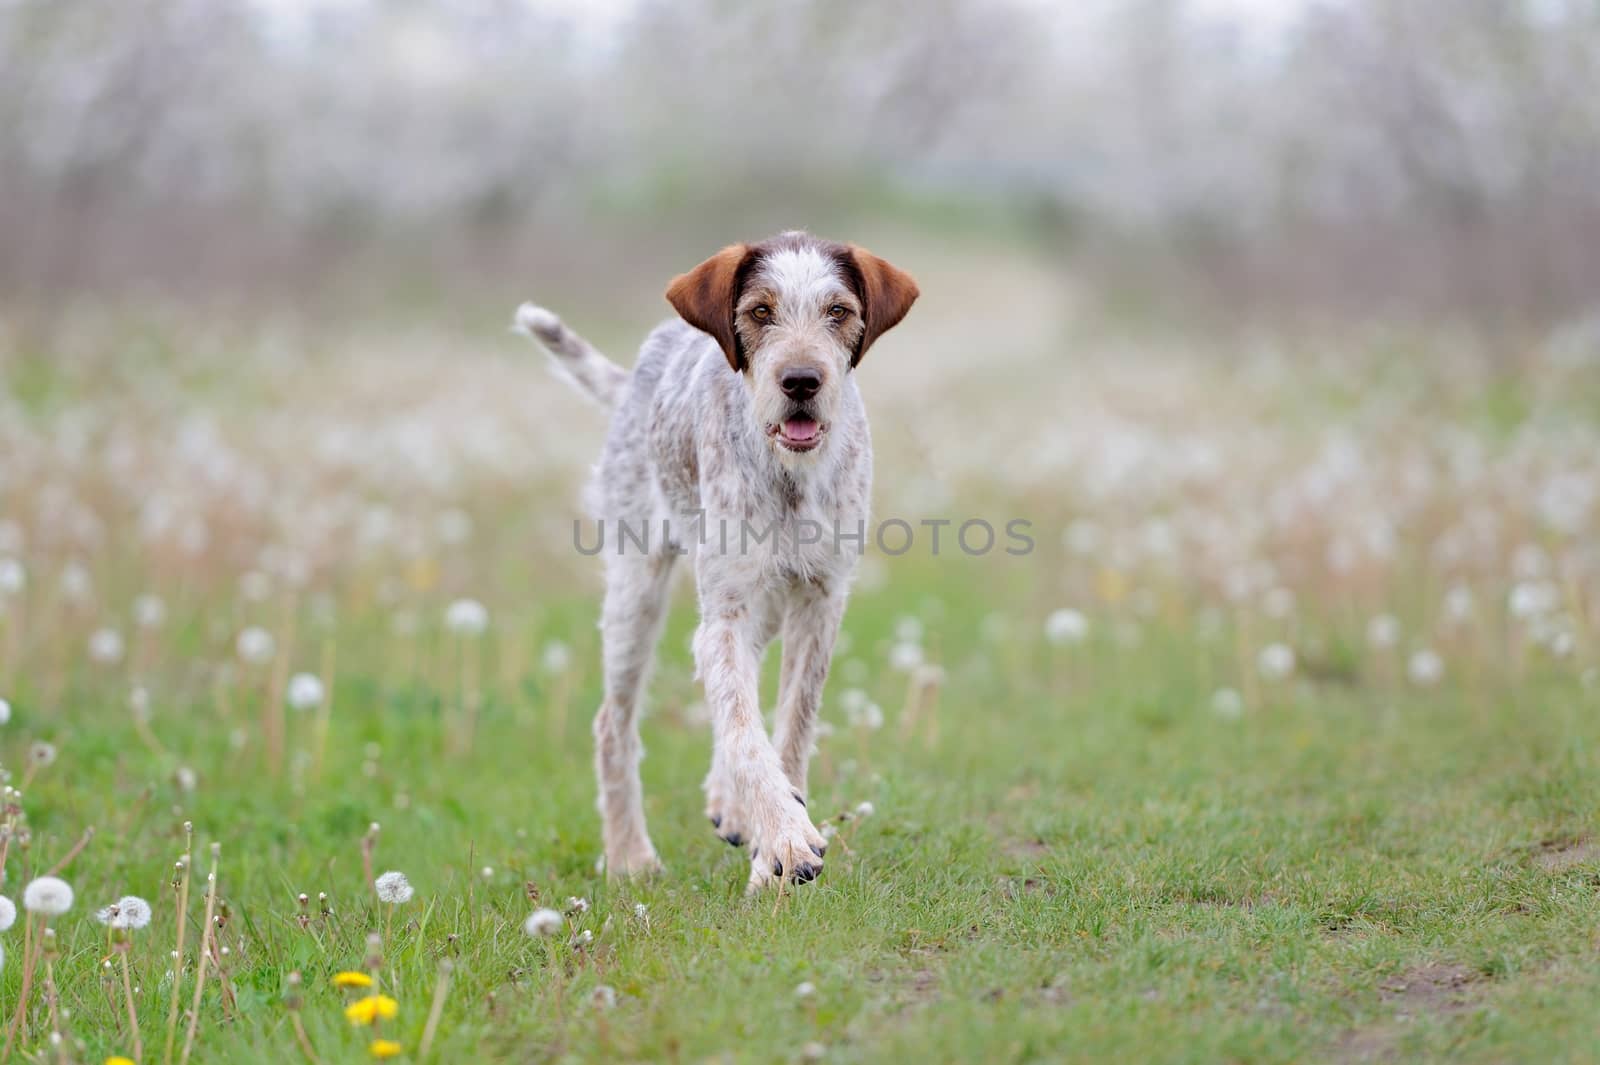 Dog running on the grass field with flowers